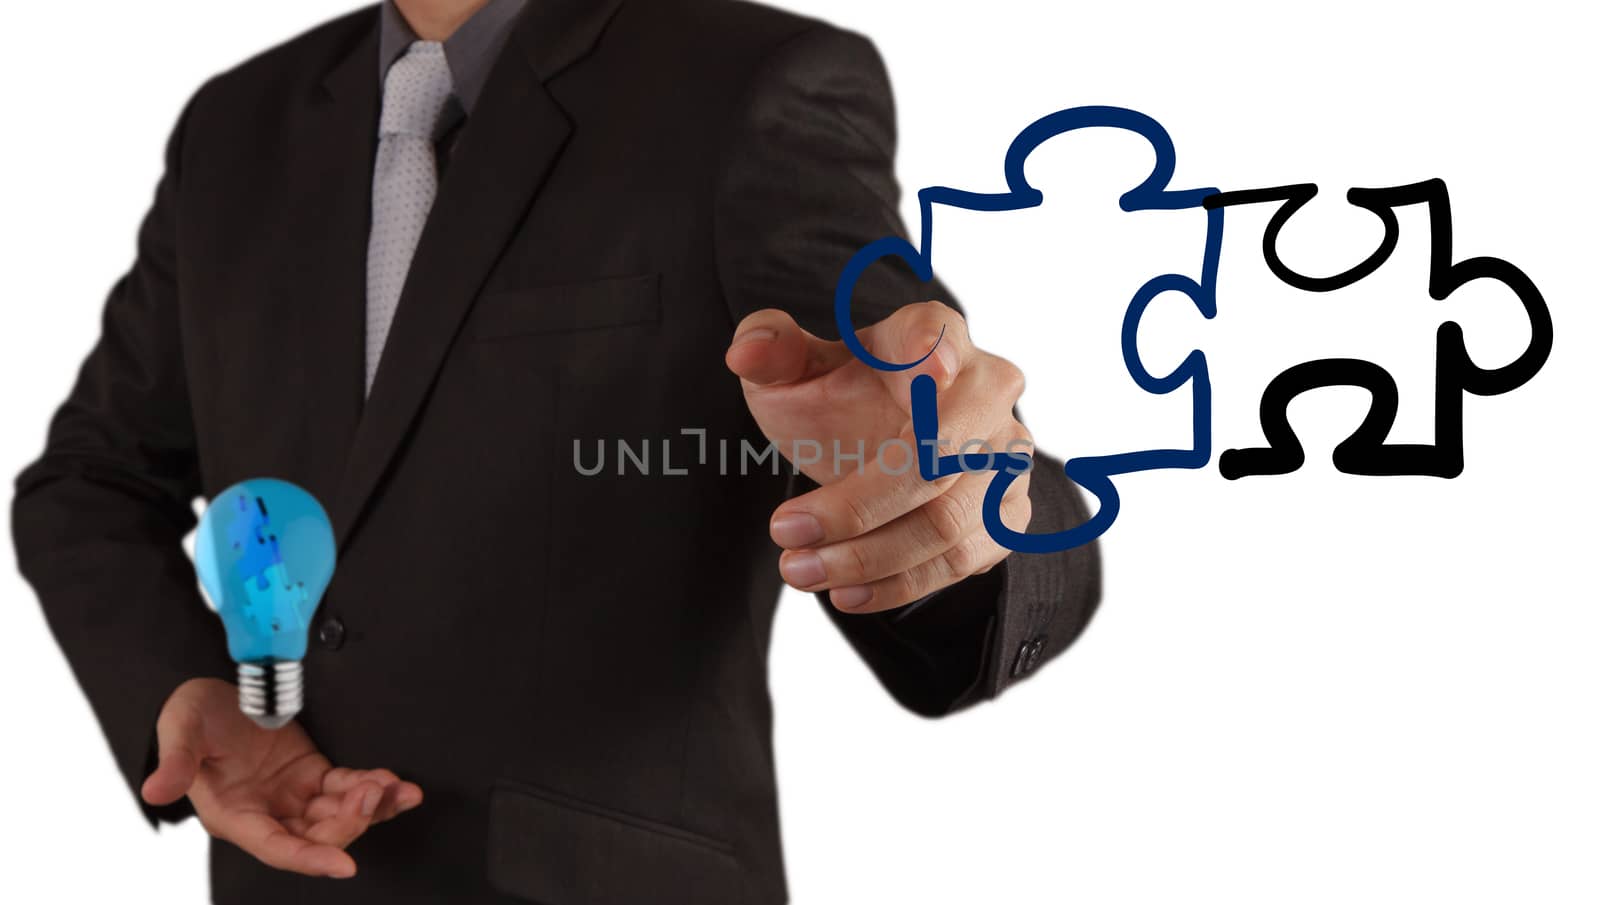 businessman hand shows light and puzzle partnership